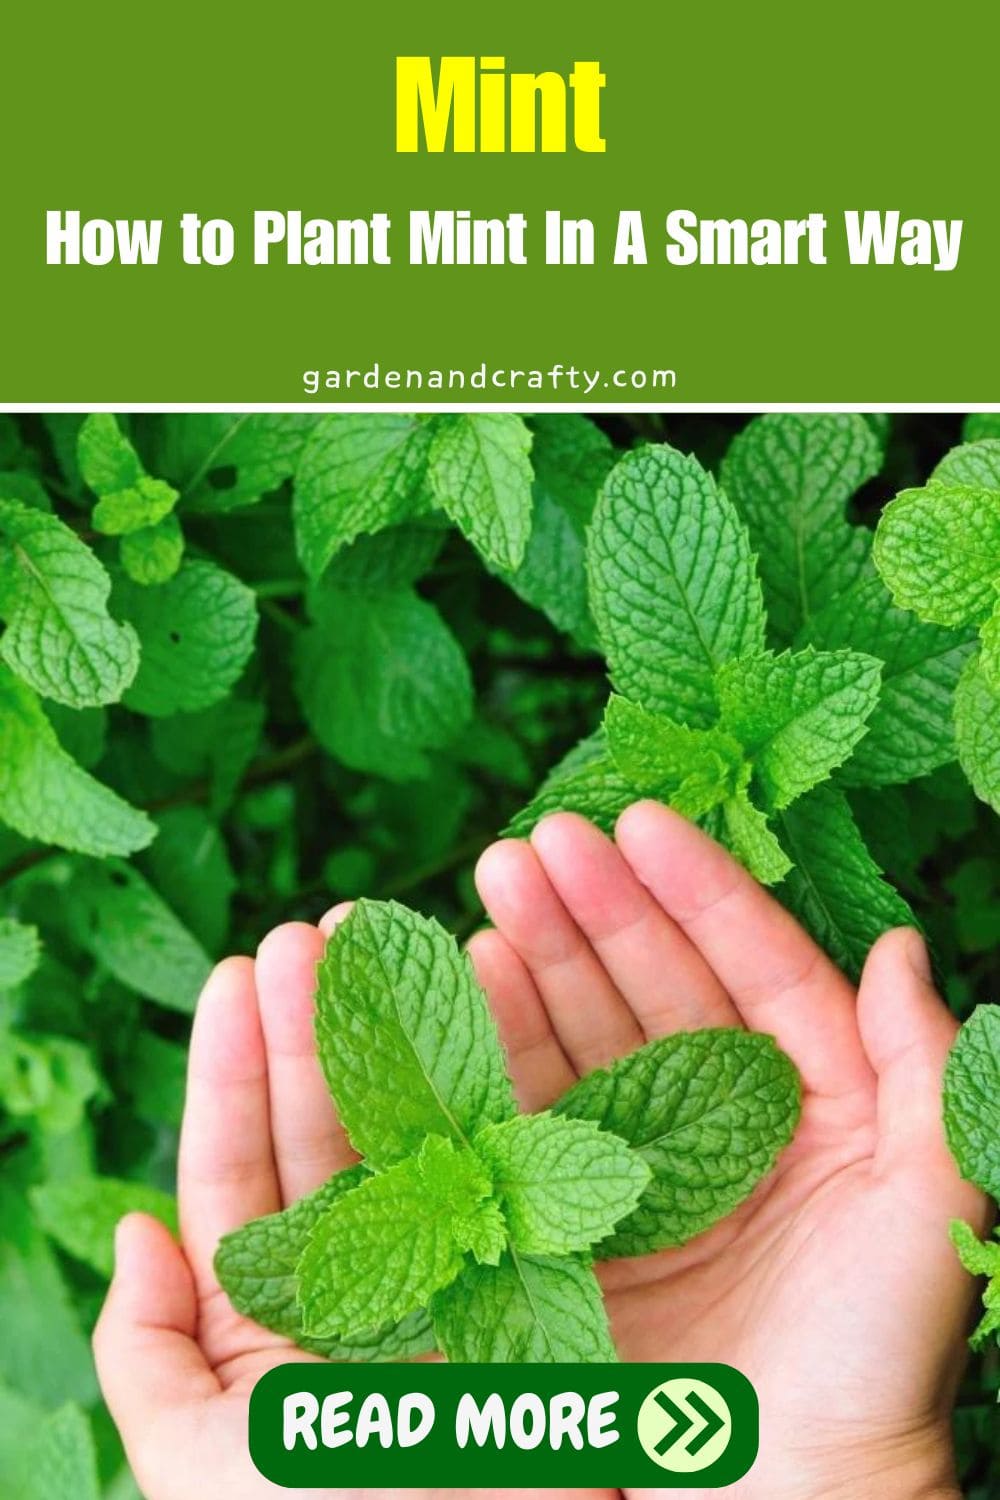 How to Plant Mint In A Smart Way